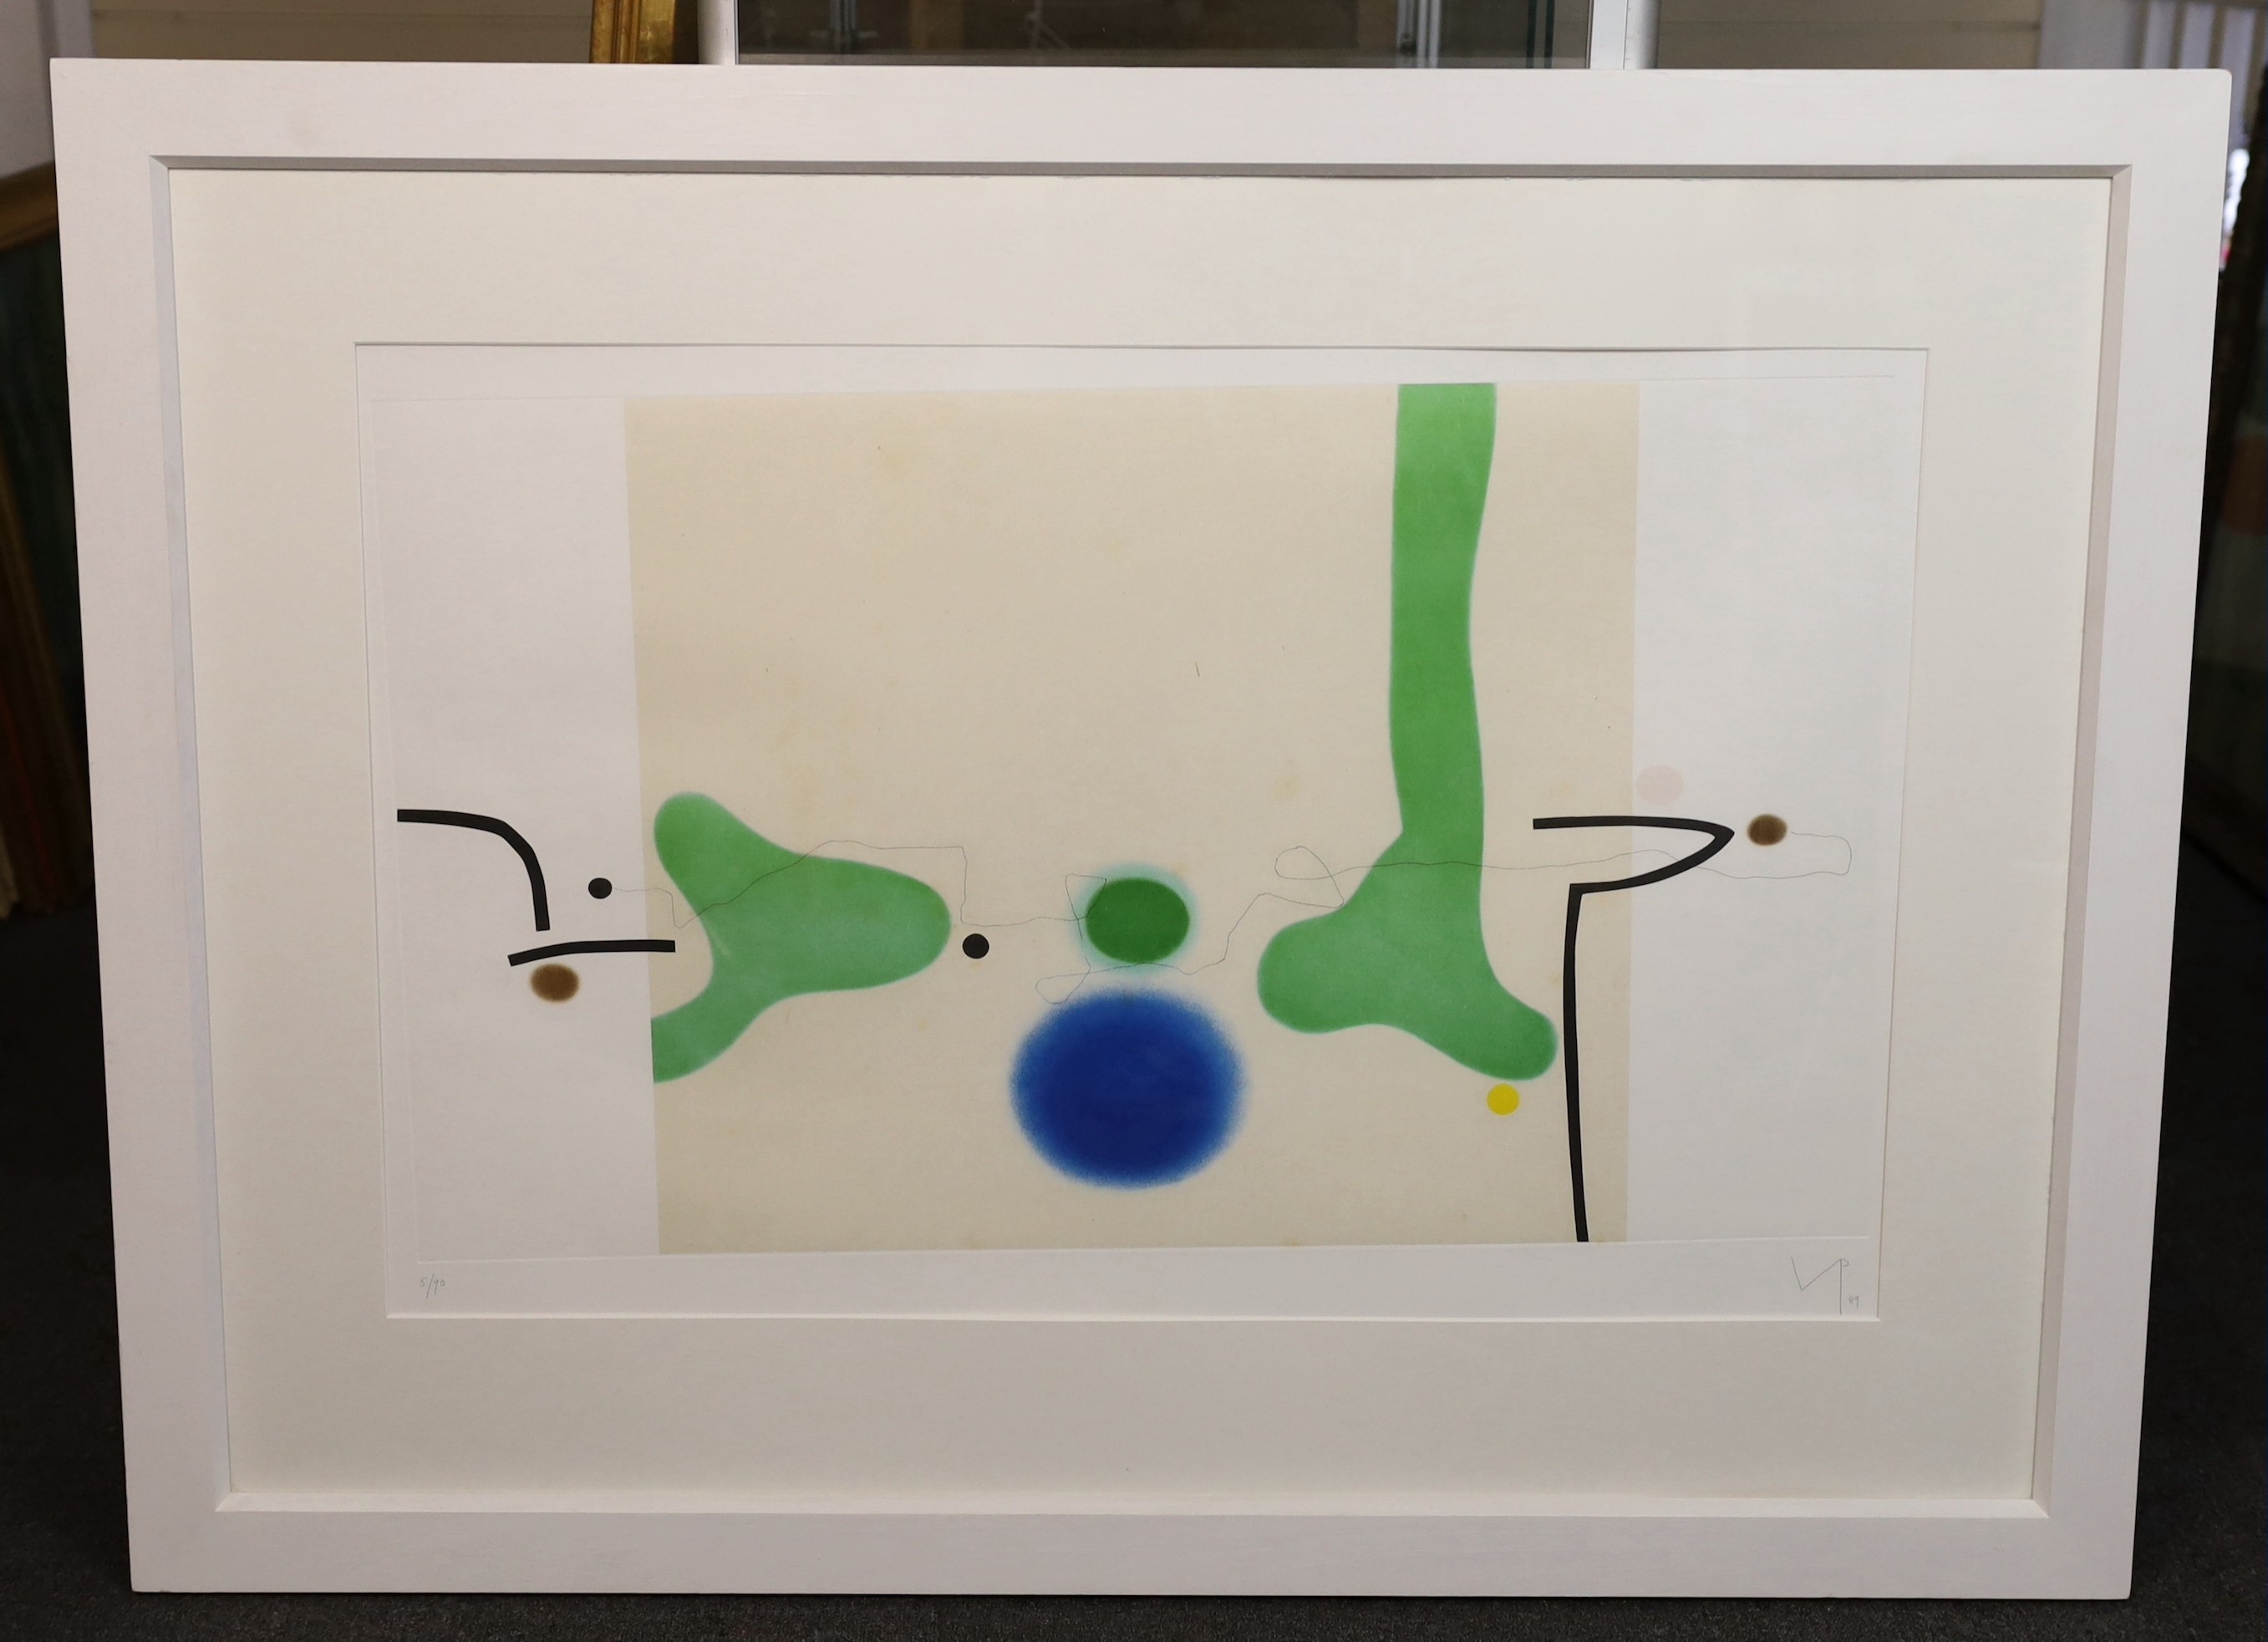 Victor Pasmore (British, 1908-1998), 'Senza Titulo III, 1989', etching and aquatint on copper plate printed in five colours on Fabriano paper, 56 x 95cm